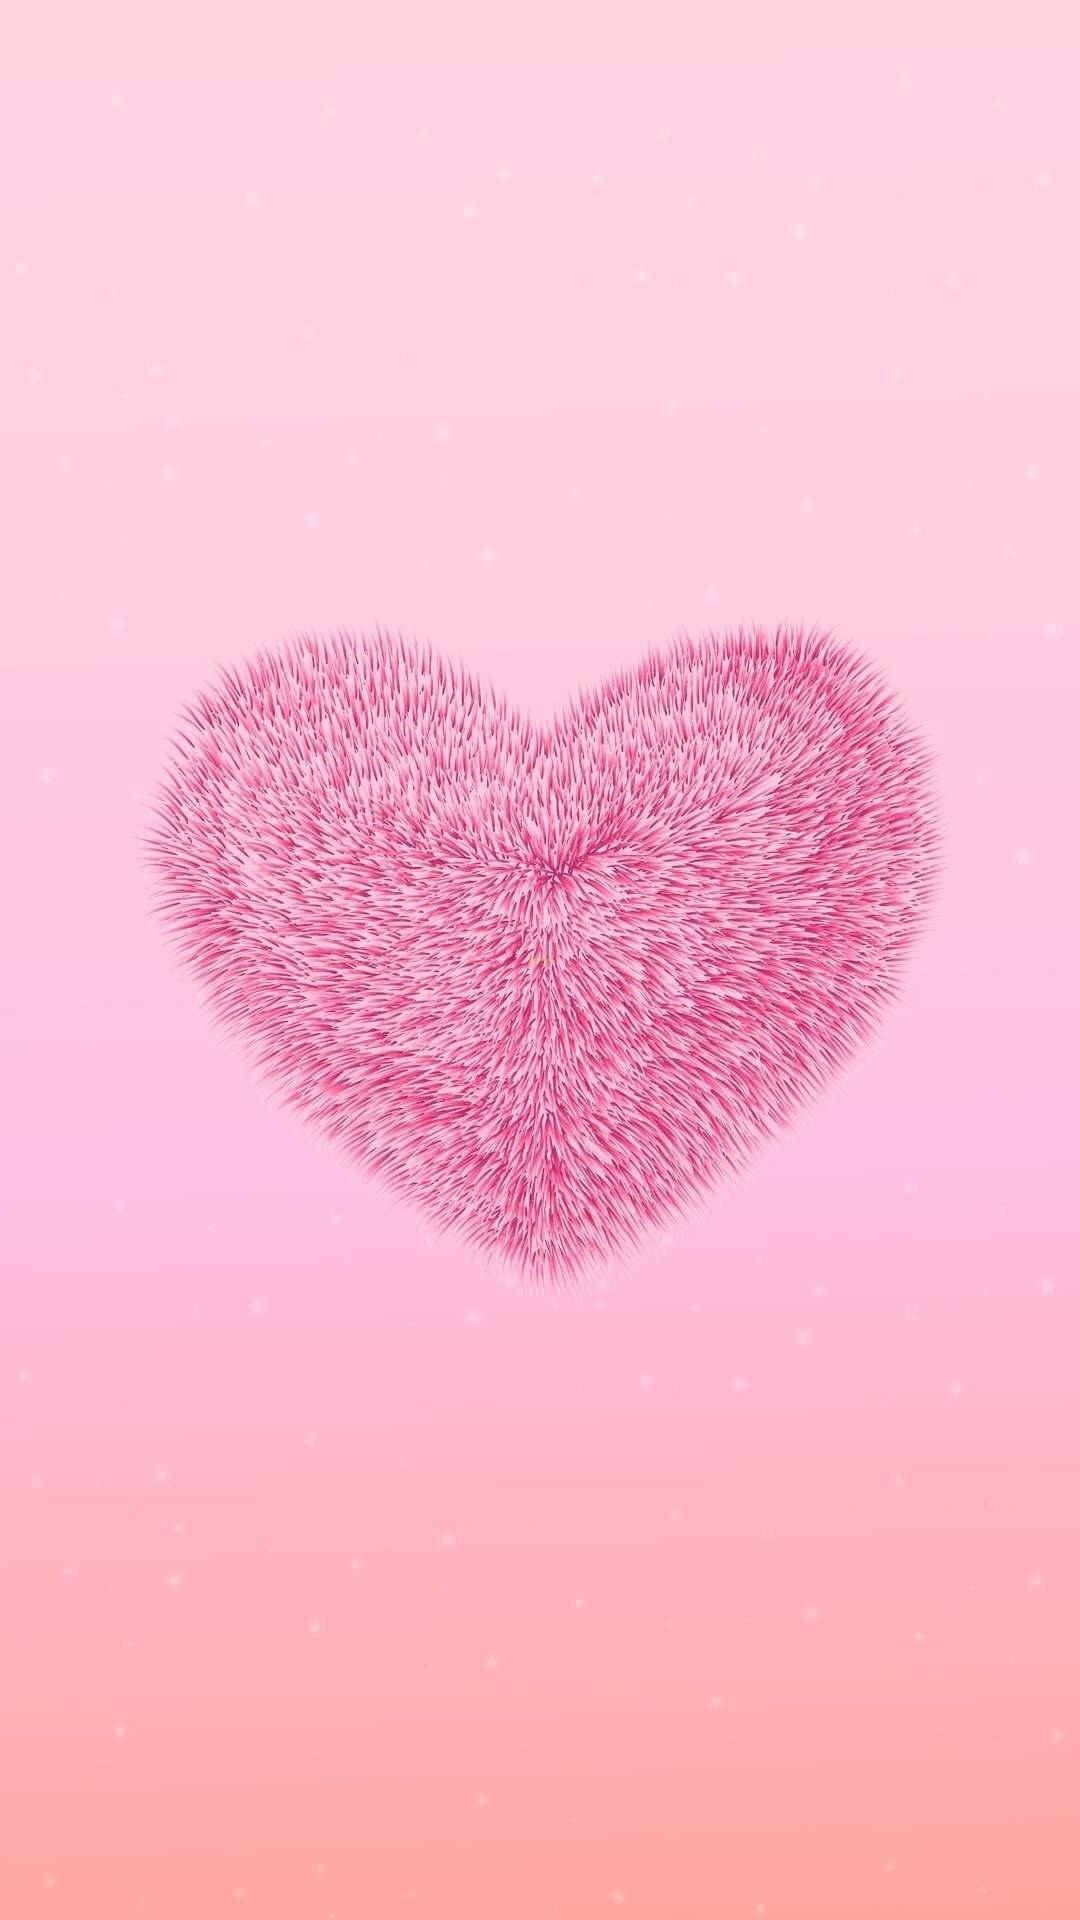 Aesthetic Pink Iphone Fluffy Heart Background